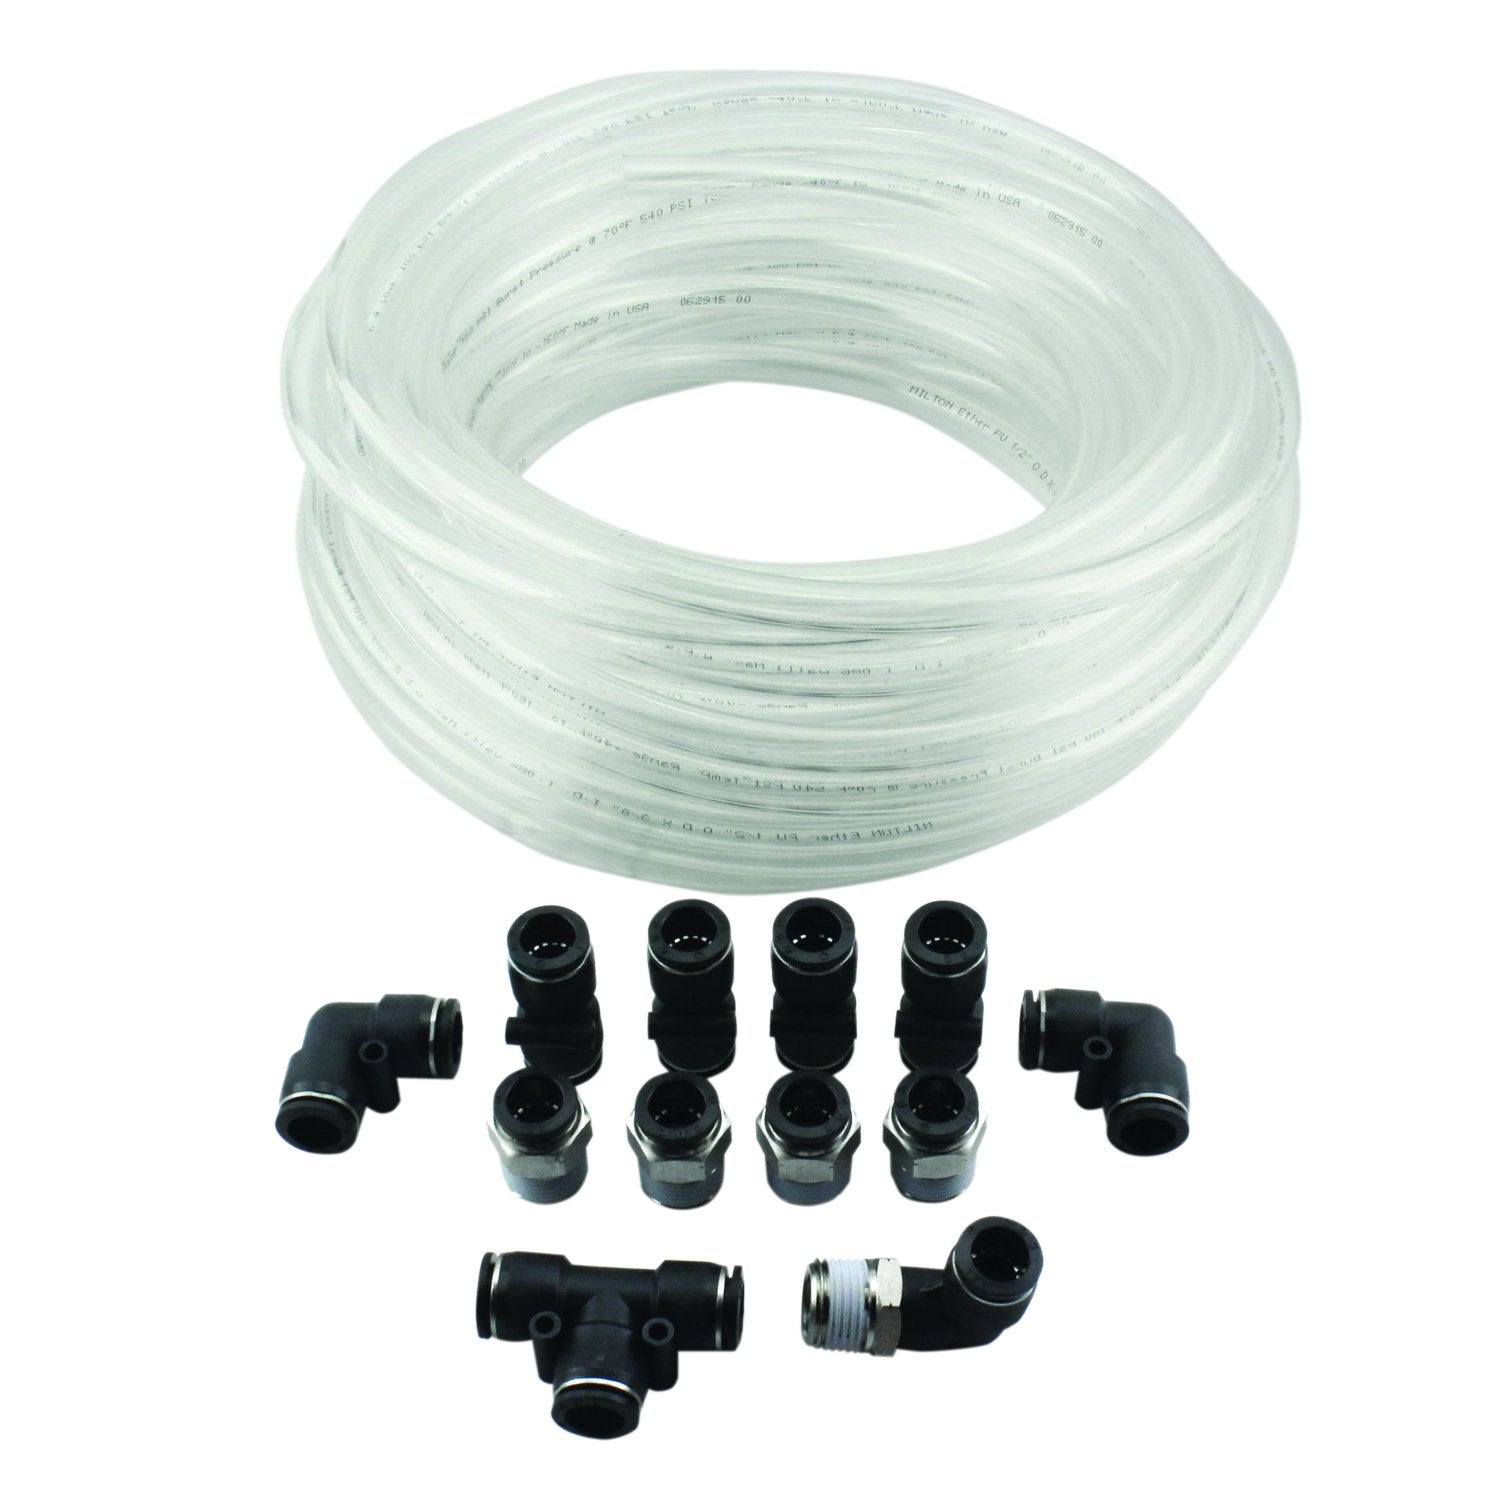 Air Line Tubing Kit, 1/2-in OD x 50 Feet Polyurethane Tube and Push to Connect Fittings